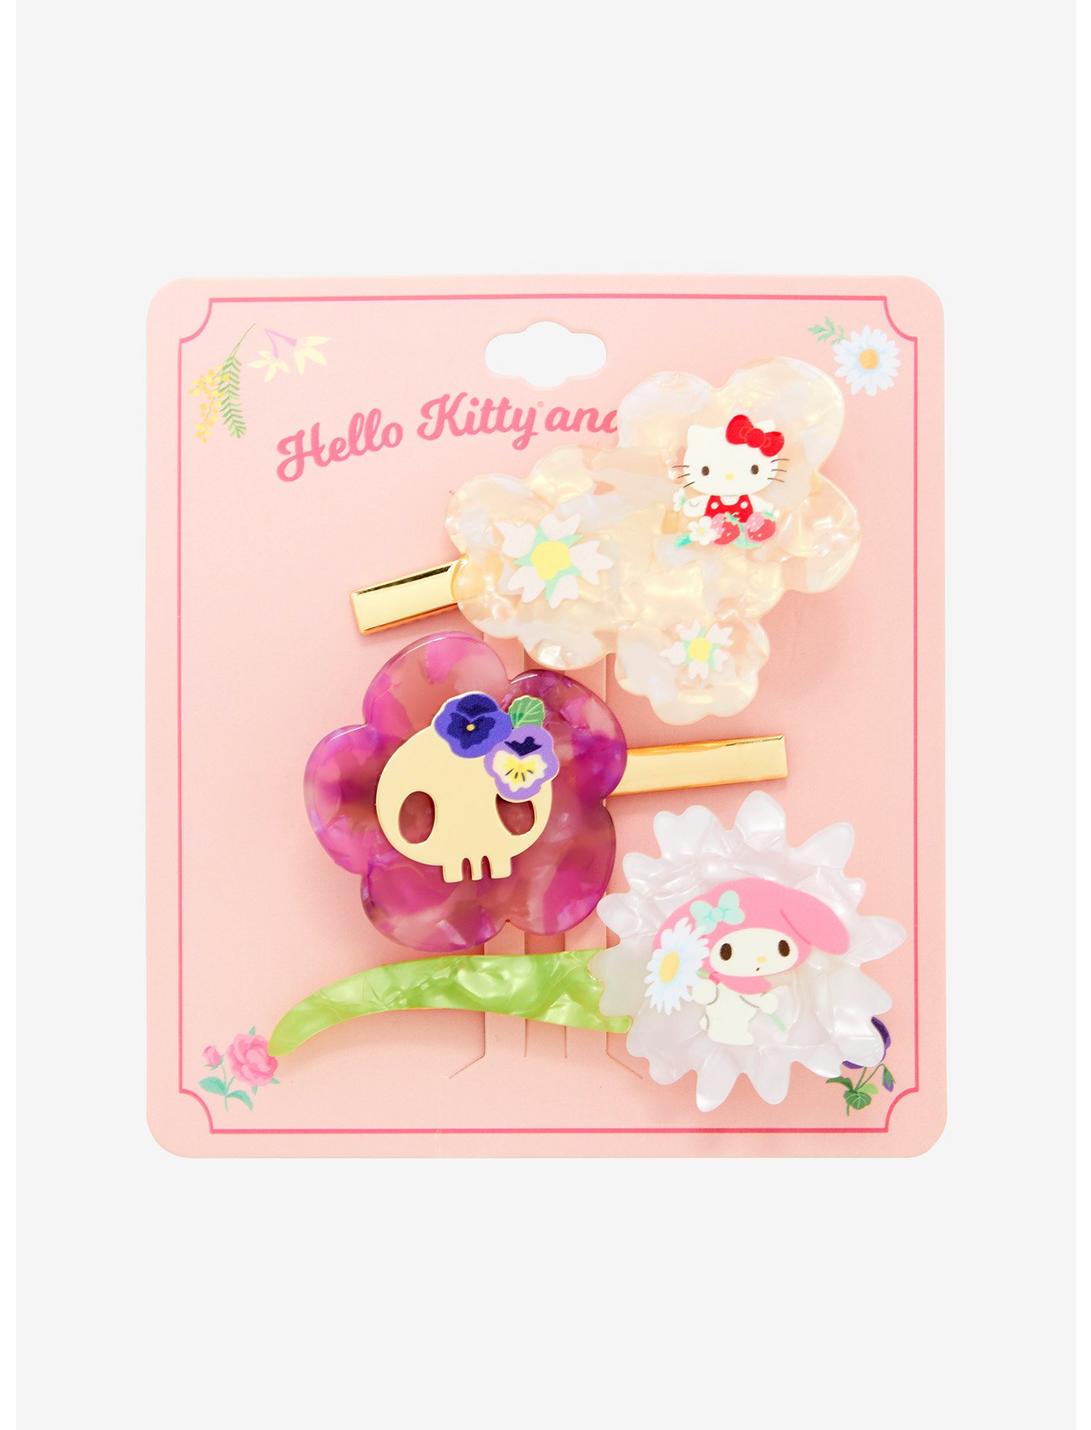 Sanrio Hello Kitty and Friends Floral Hair Clip Set - BoxLunch Exclusive, , hi-res